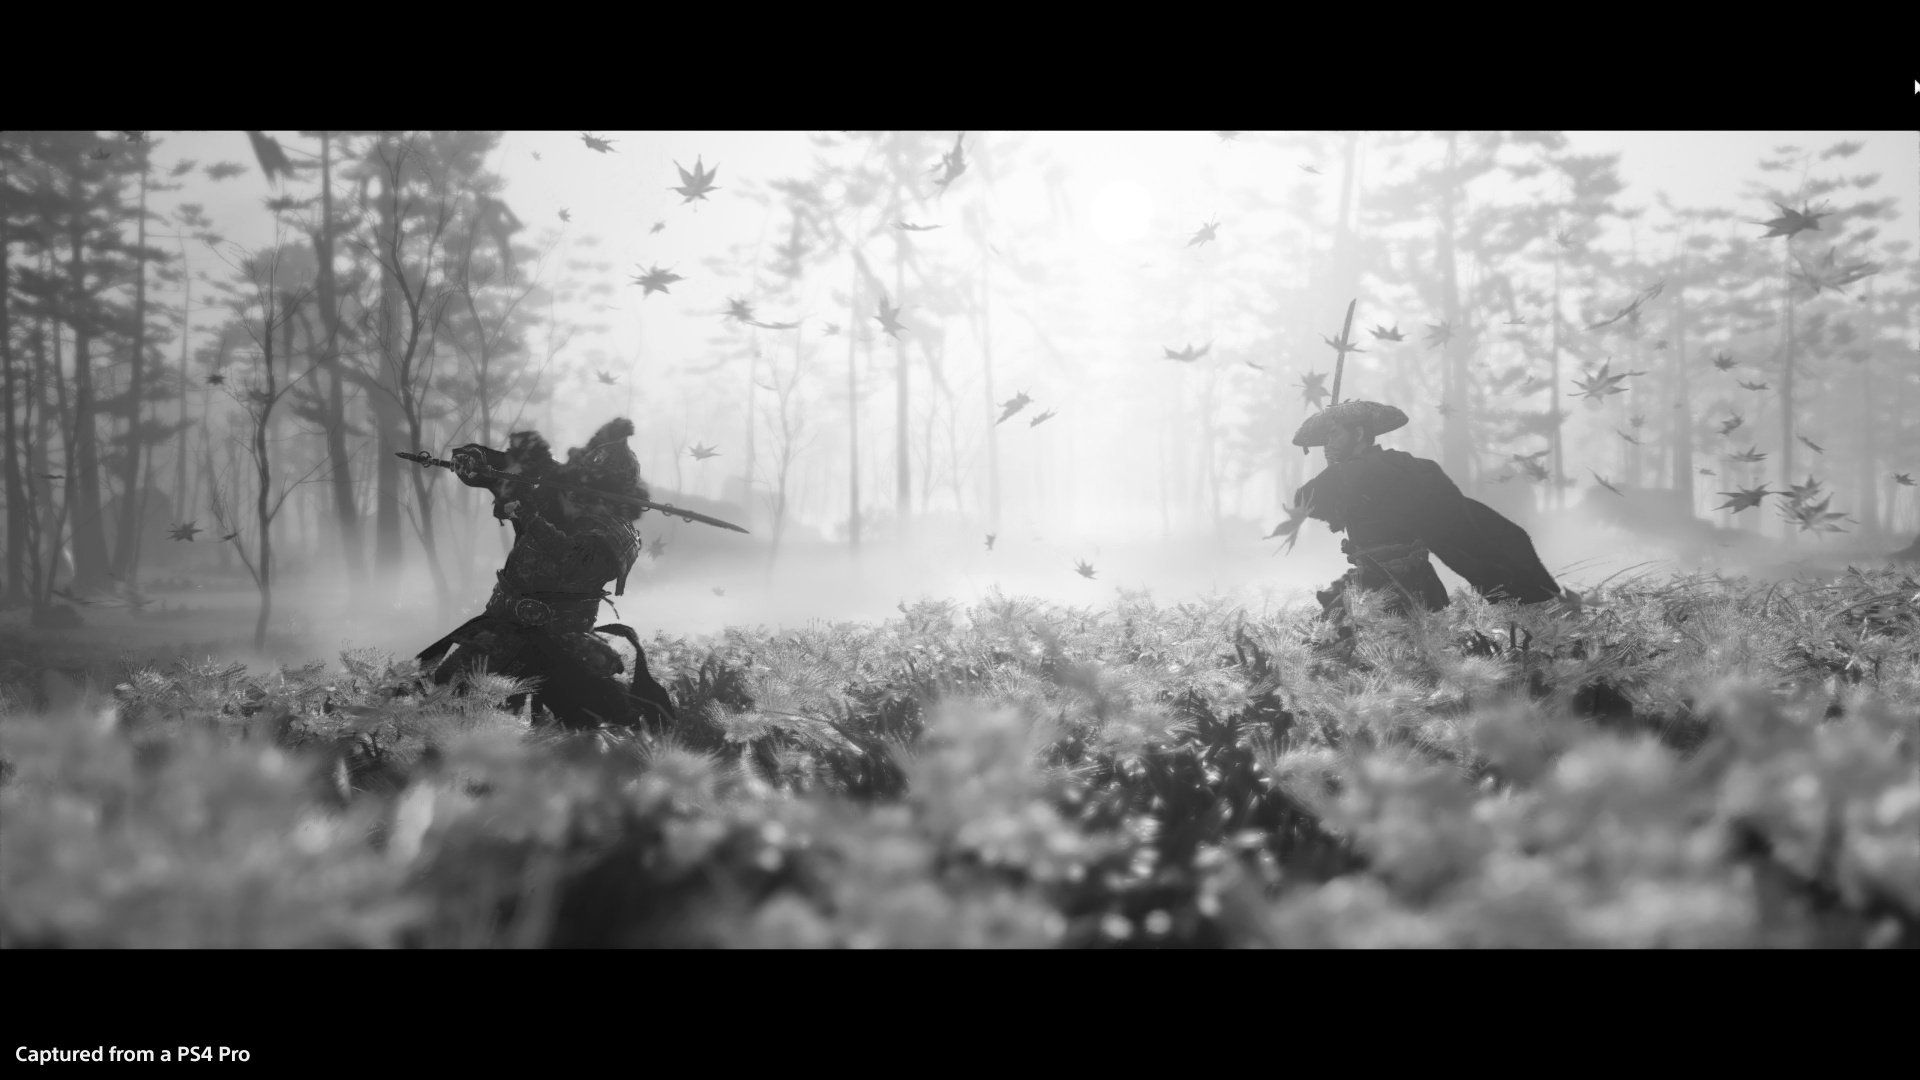 Ghost of Tsushima: A Perfectly Constructed Work of Art - PS4 Review